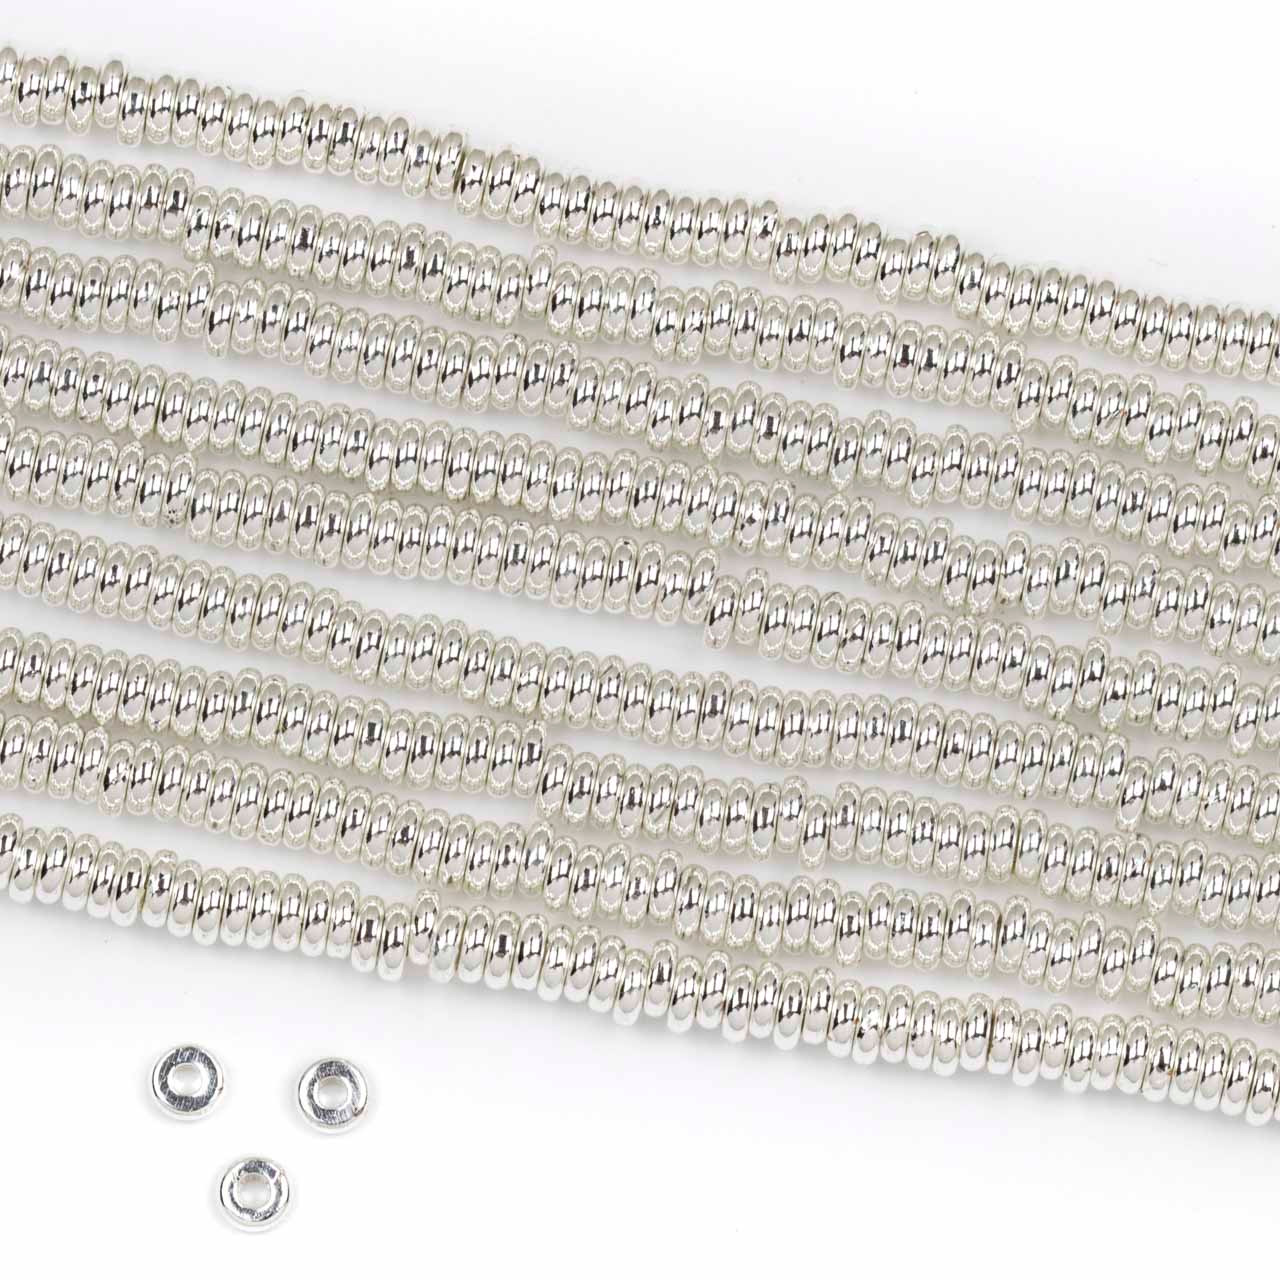 Silver Plated Brass 1.5x4mm Rondelle Spacer Beads with approximately 1.3mm  Hole - approx. 8 inch